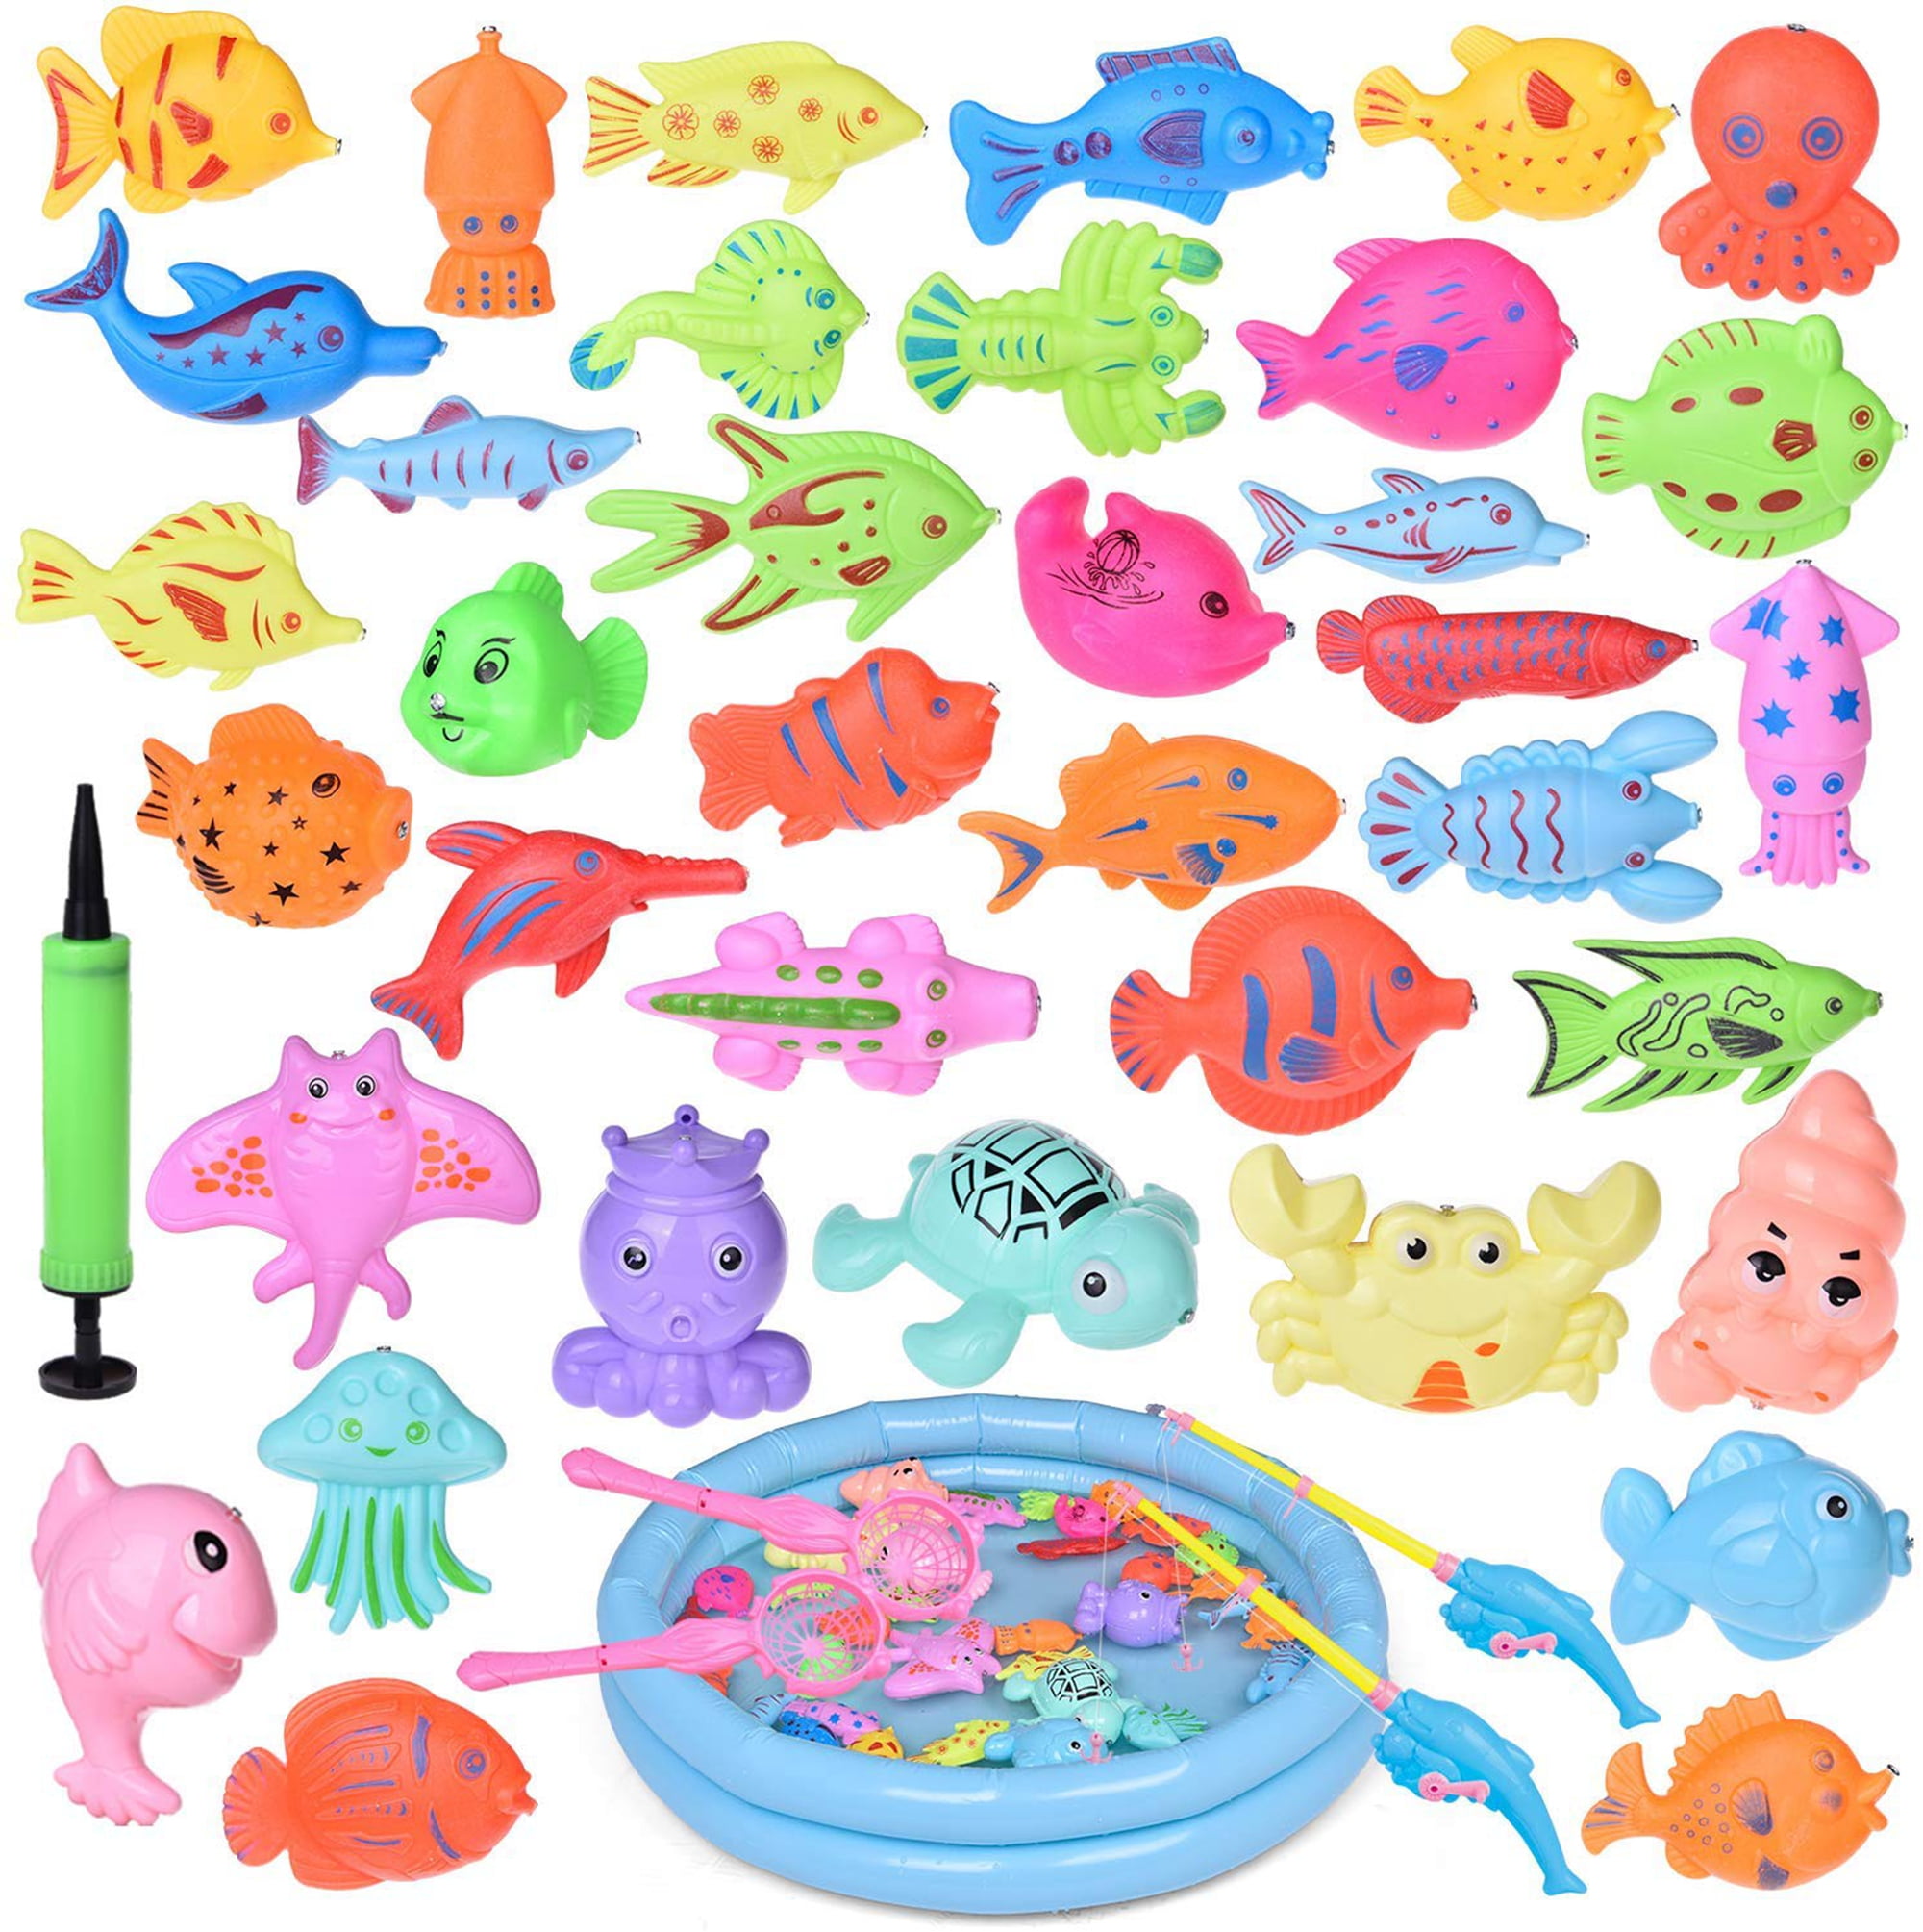 40 Pieces Magnetic Fishing Game for Kids Children Early Educational Supplies 